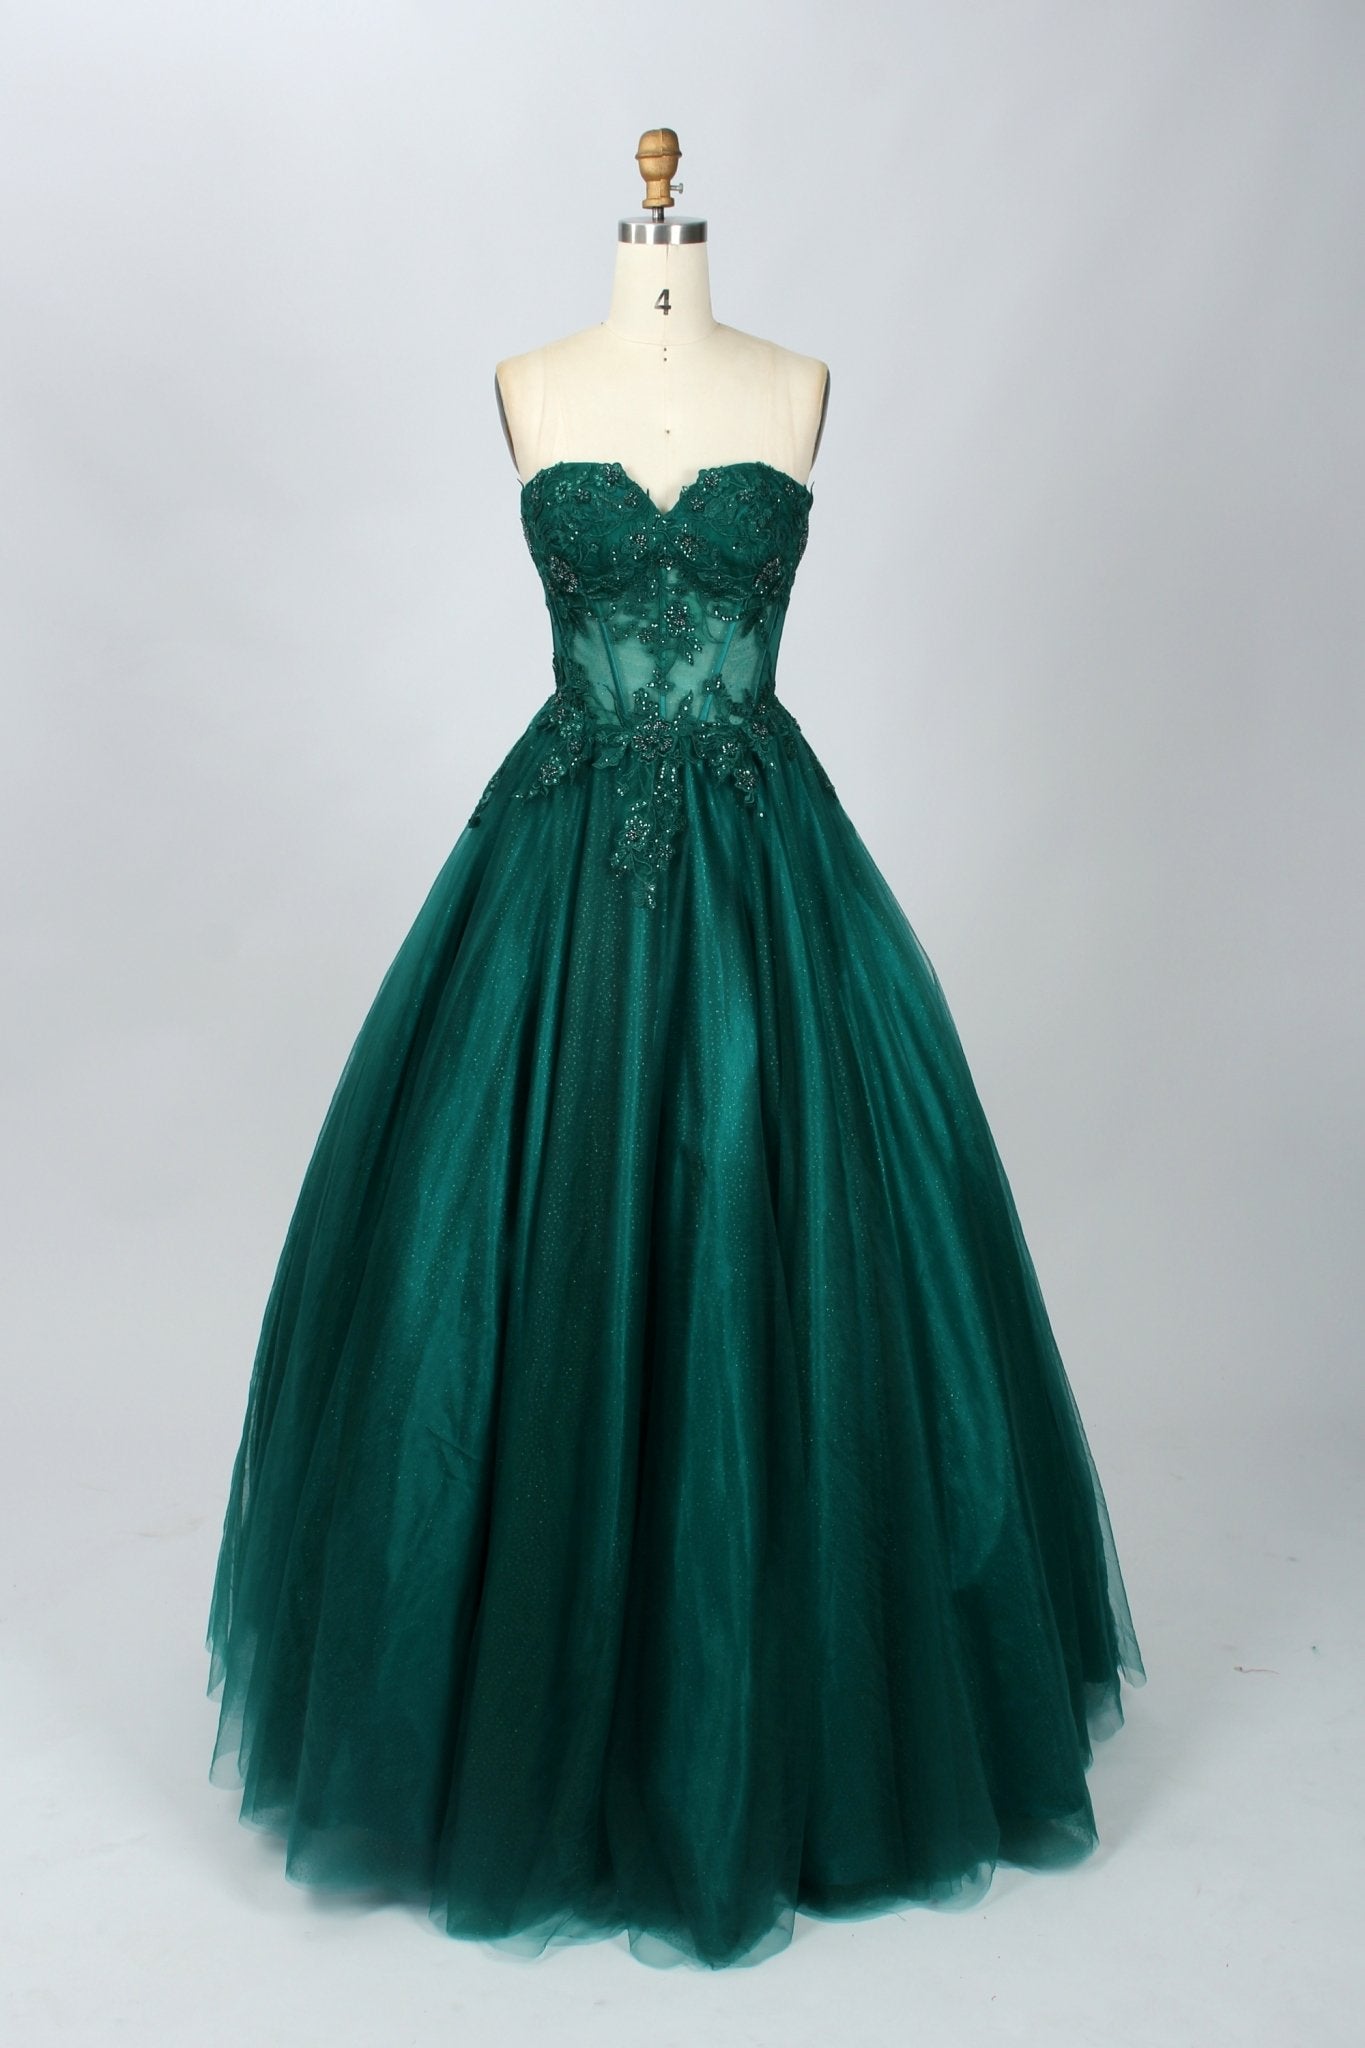 Green Blue Tulle Party Dress, Lace Floral Applique Prom Dress, Beaded  Sleeveless Evening Dress, Ruched V Neck Wedding Dress With Back Zipper -  Etsy